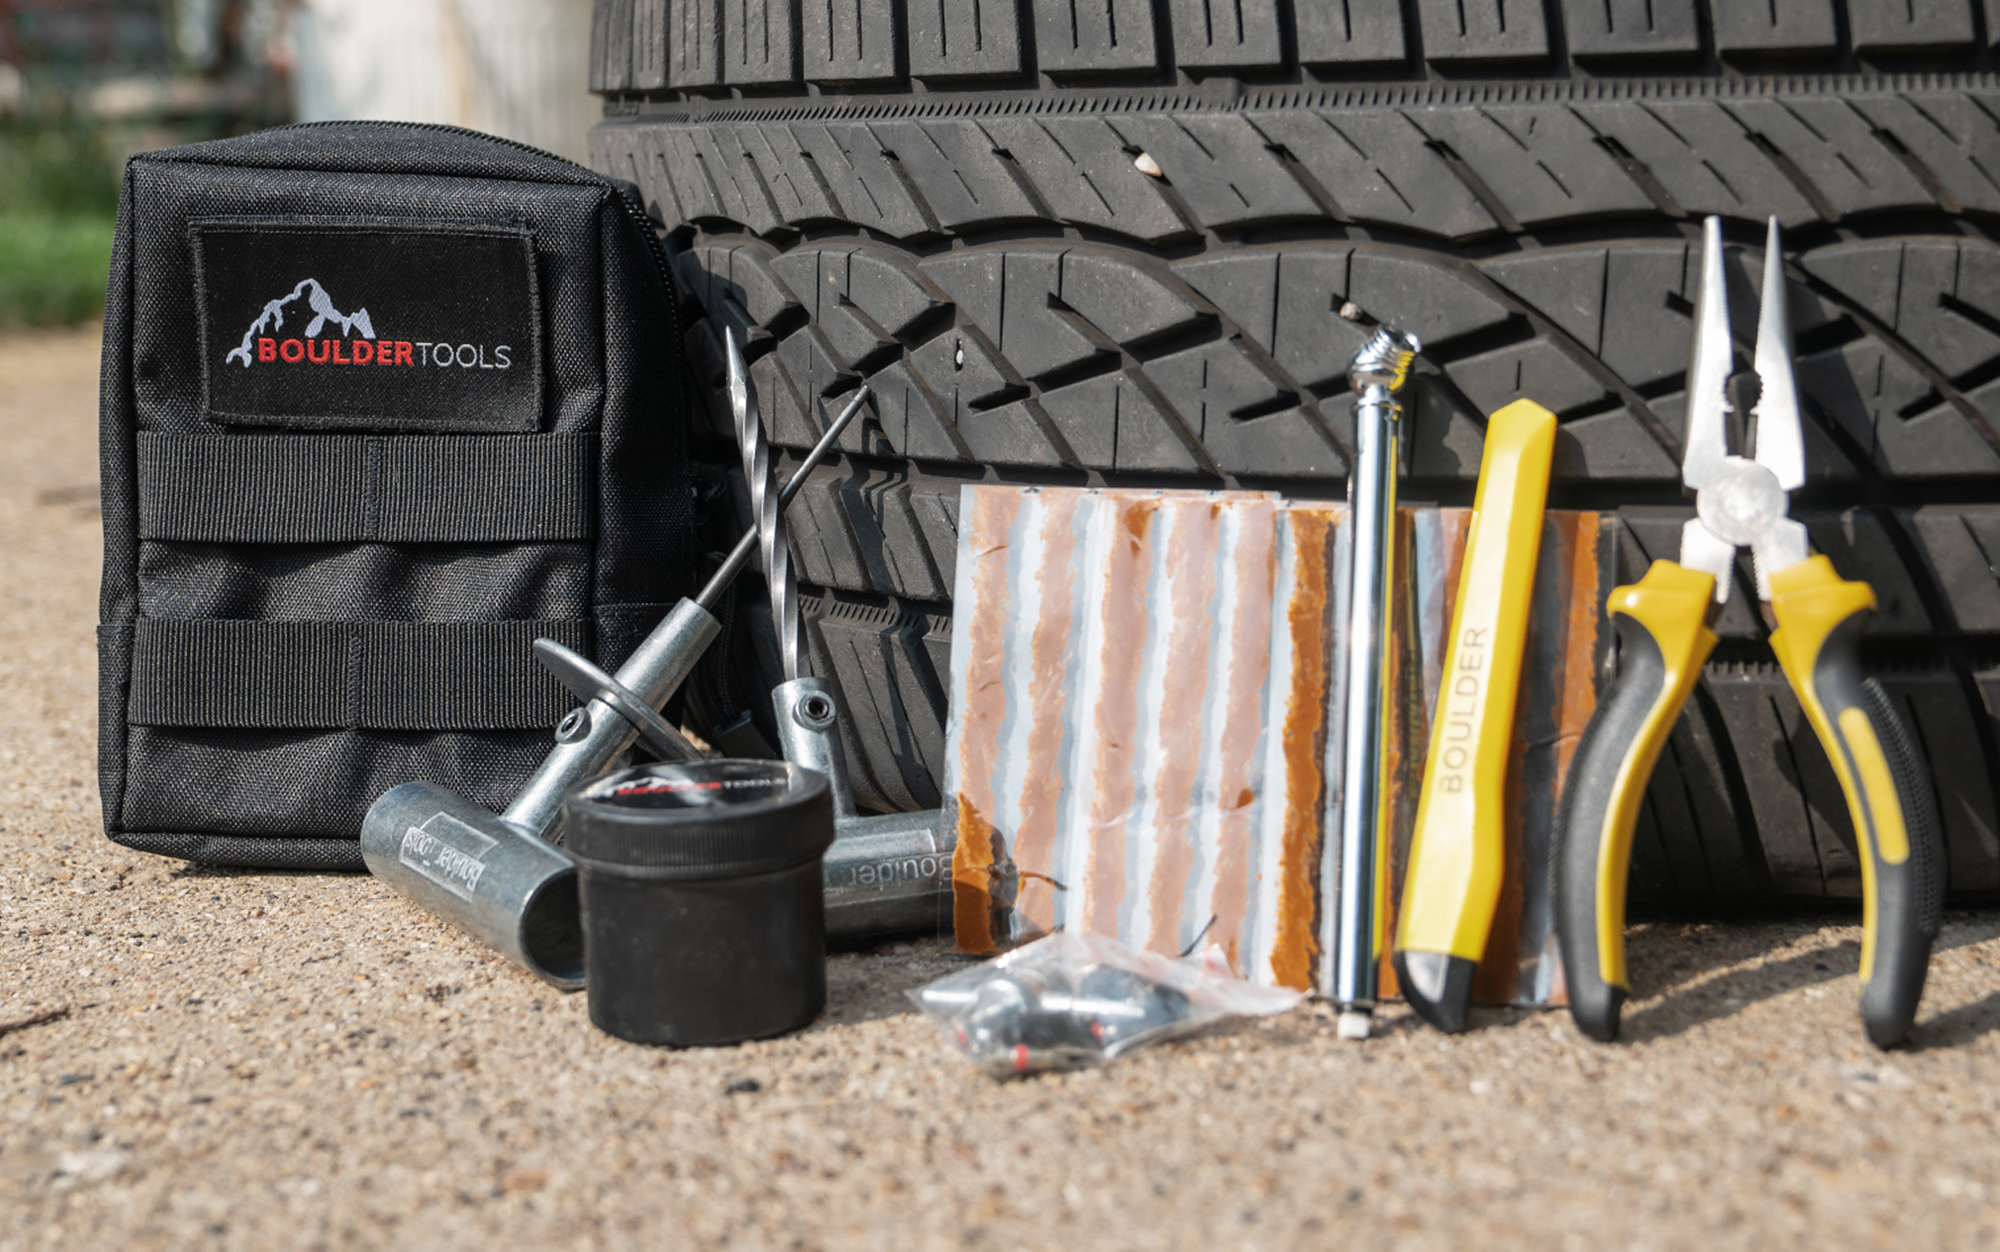 We tested the Boulder Tools Tire Repair Kit.